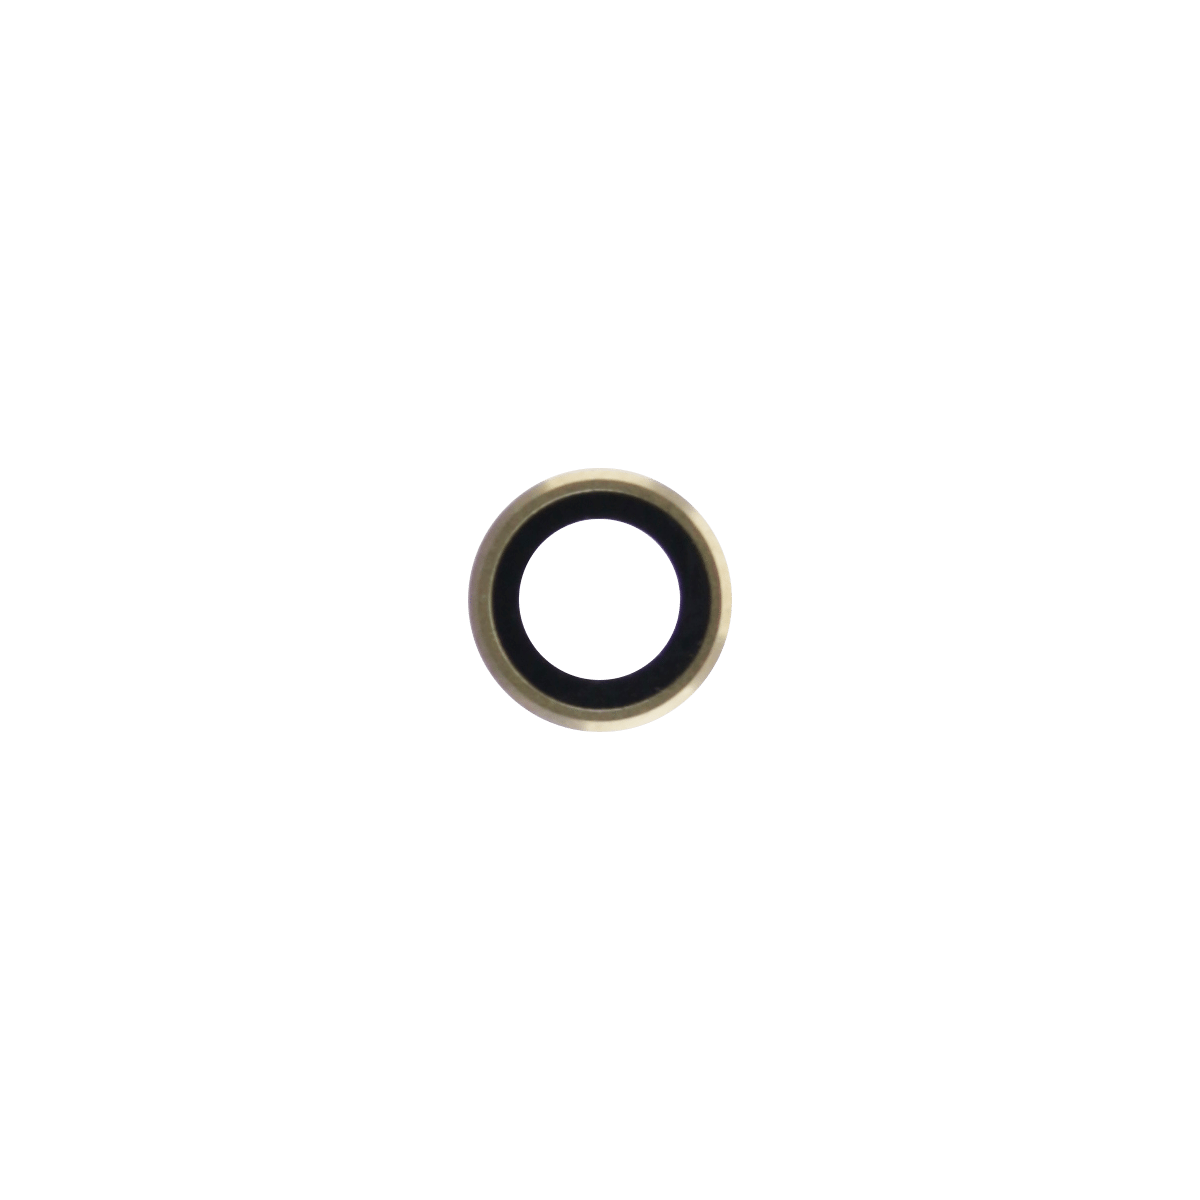 iPhone 6s Plus Rear Camera Lens Cover Replacement